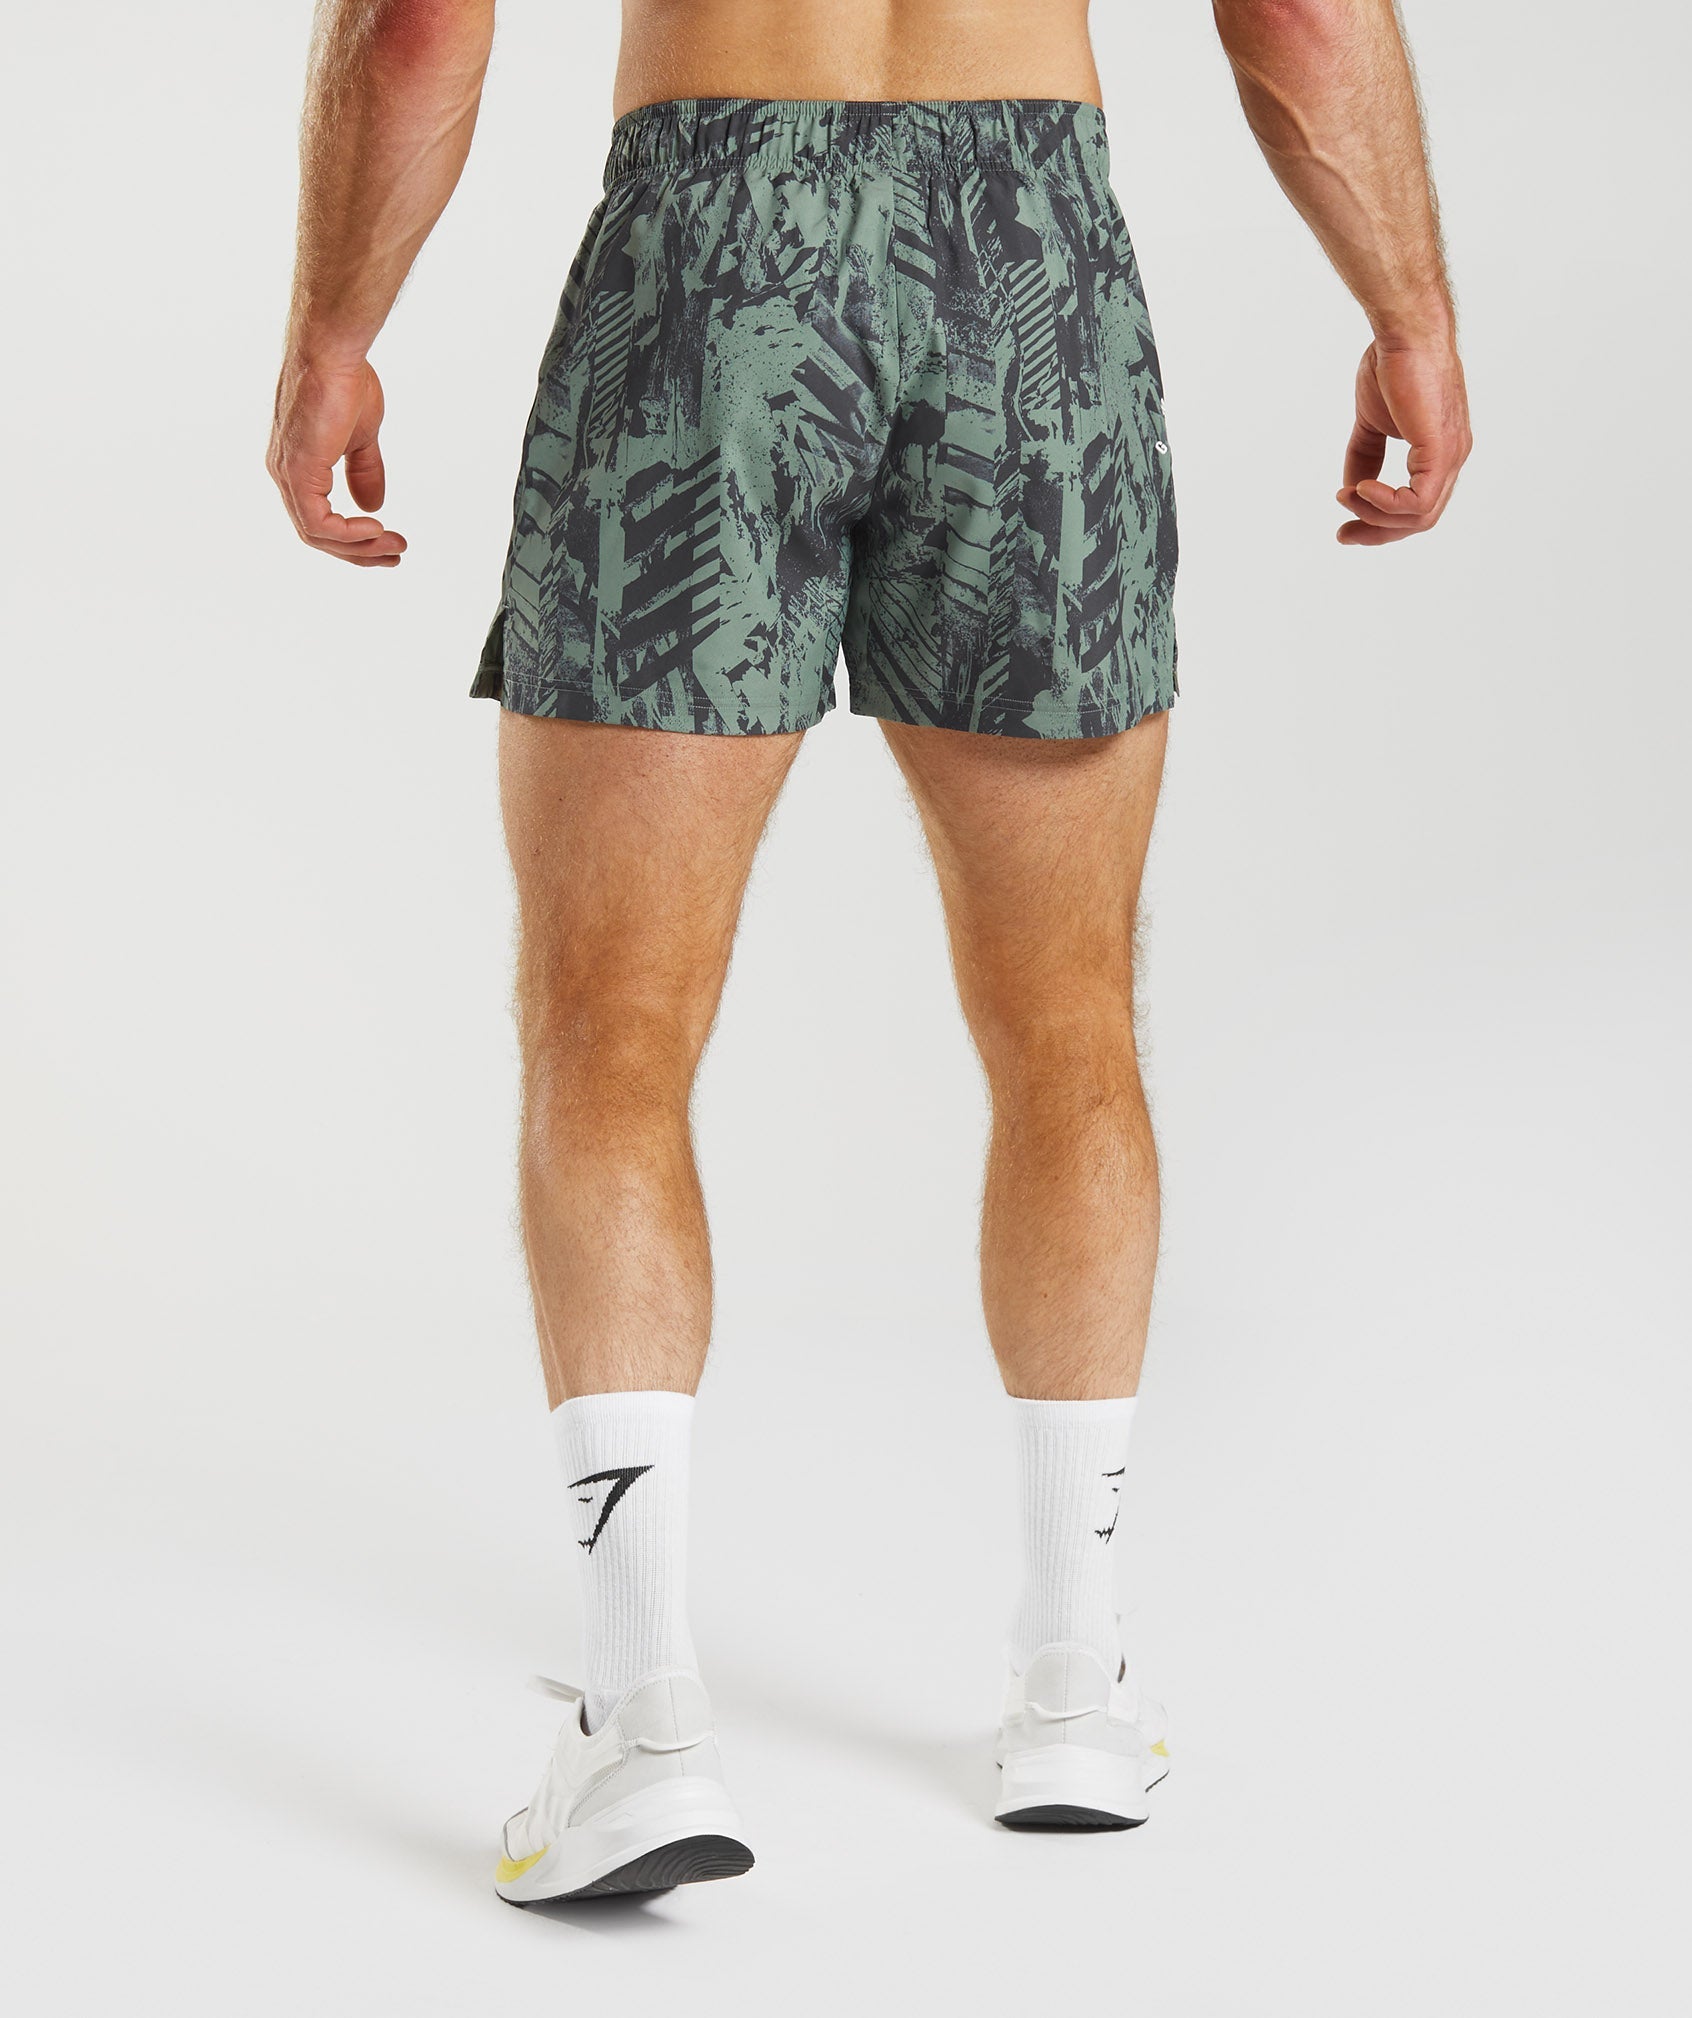 Sport 5" Shorts in Willow Green Print - view 2